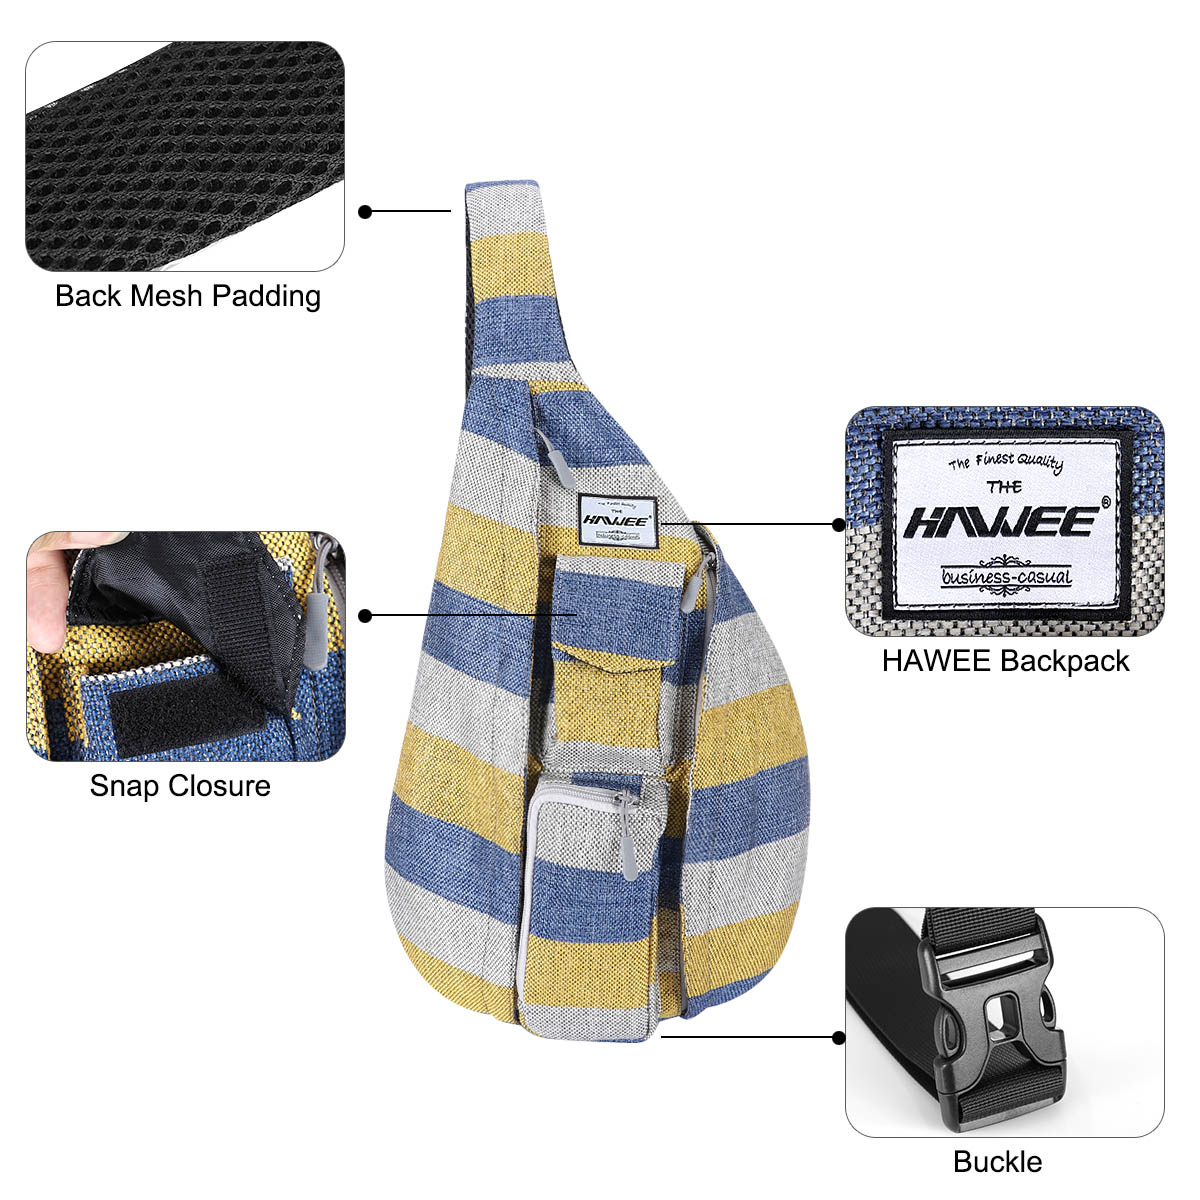 HAWEE Chest Daypack Hiking Backpack Sling Bag Sports Shoulder Travel Crossbody Daypack for Women, Wide Stripes of Yellow/ Blue/Gray - image 4 of 7